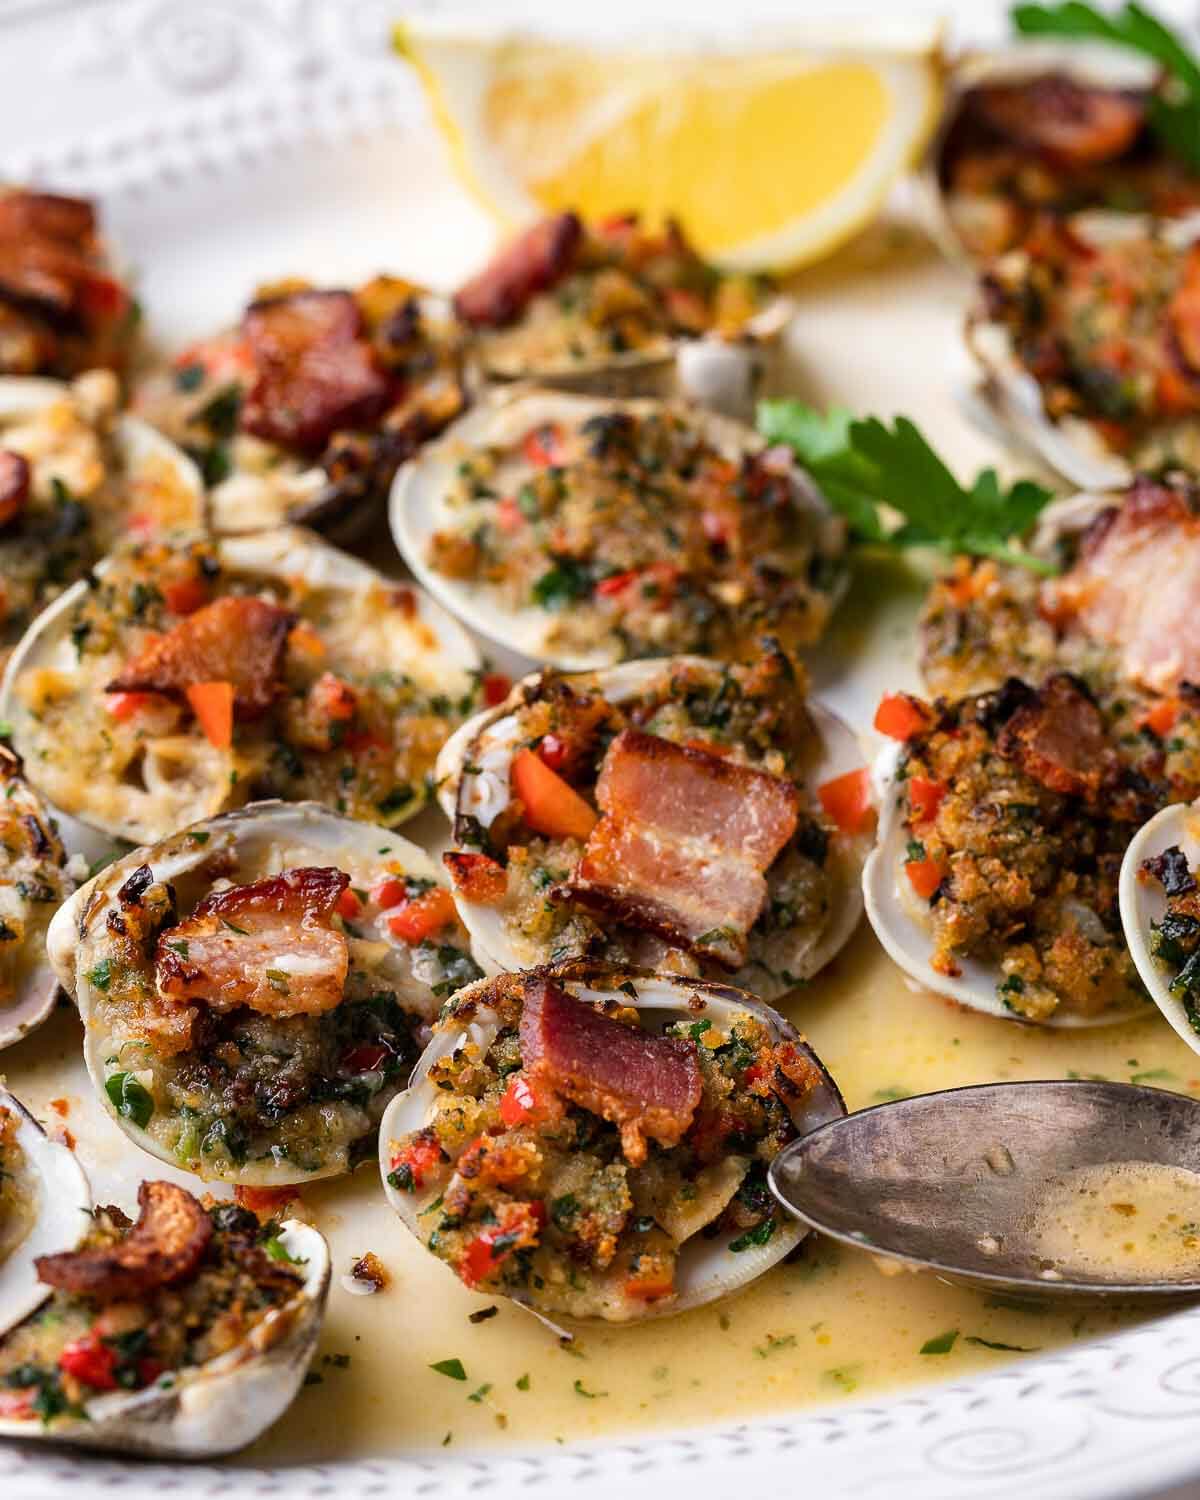 Clams casino in white plate with lemon wedges.